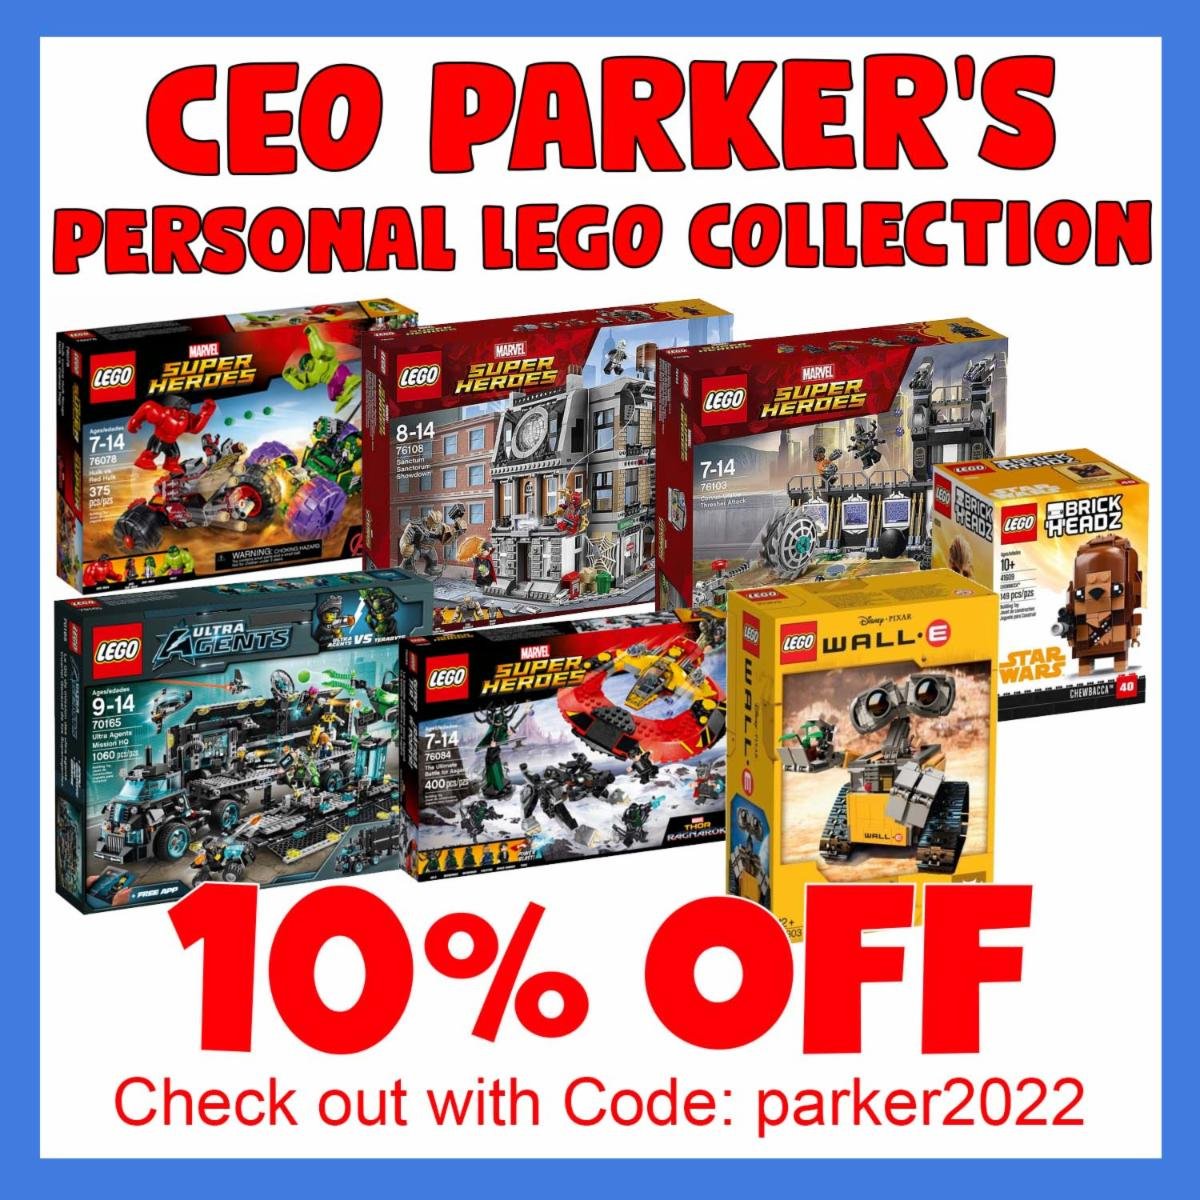 CEO parkers collection.jpg